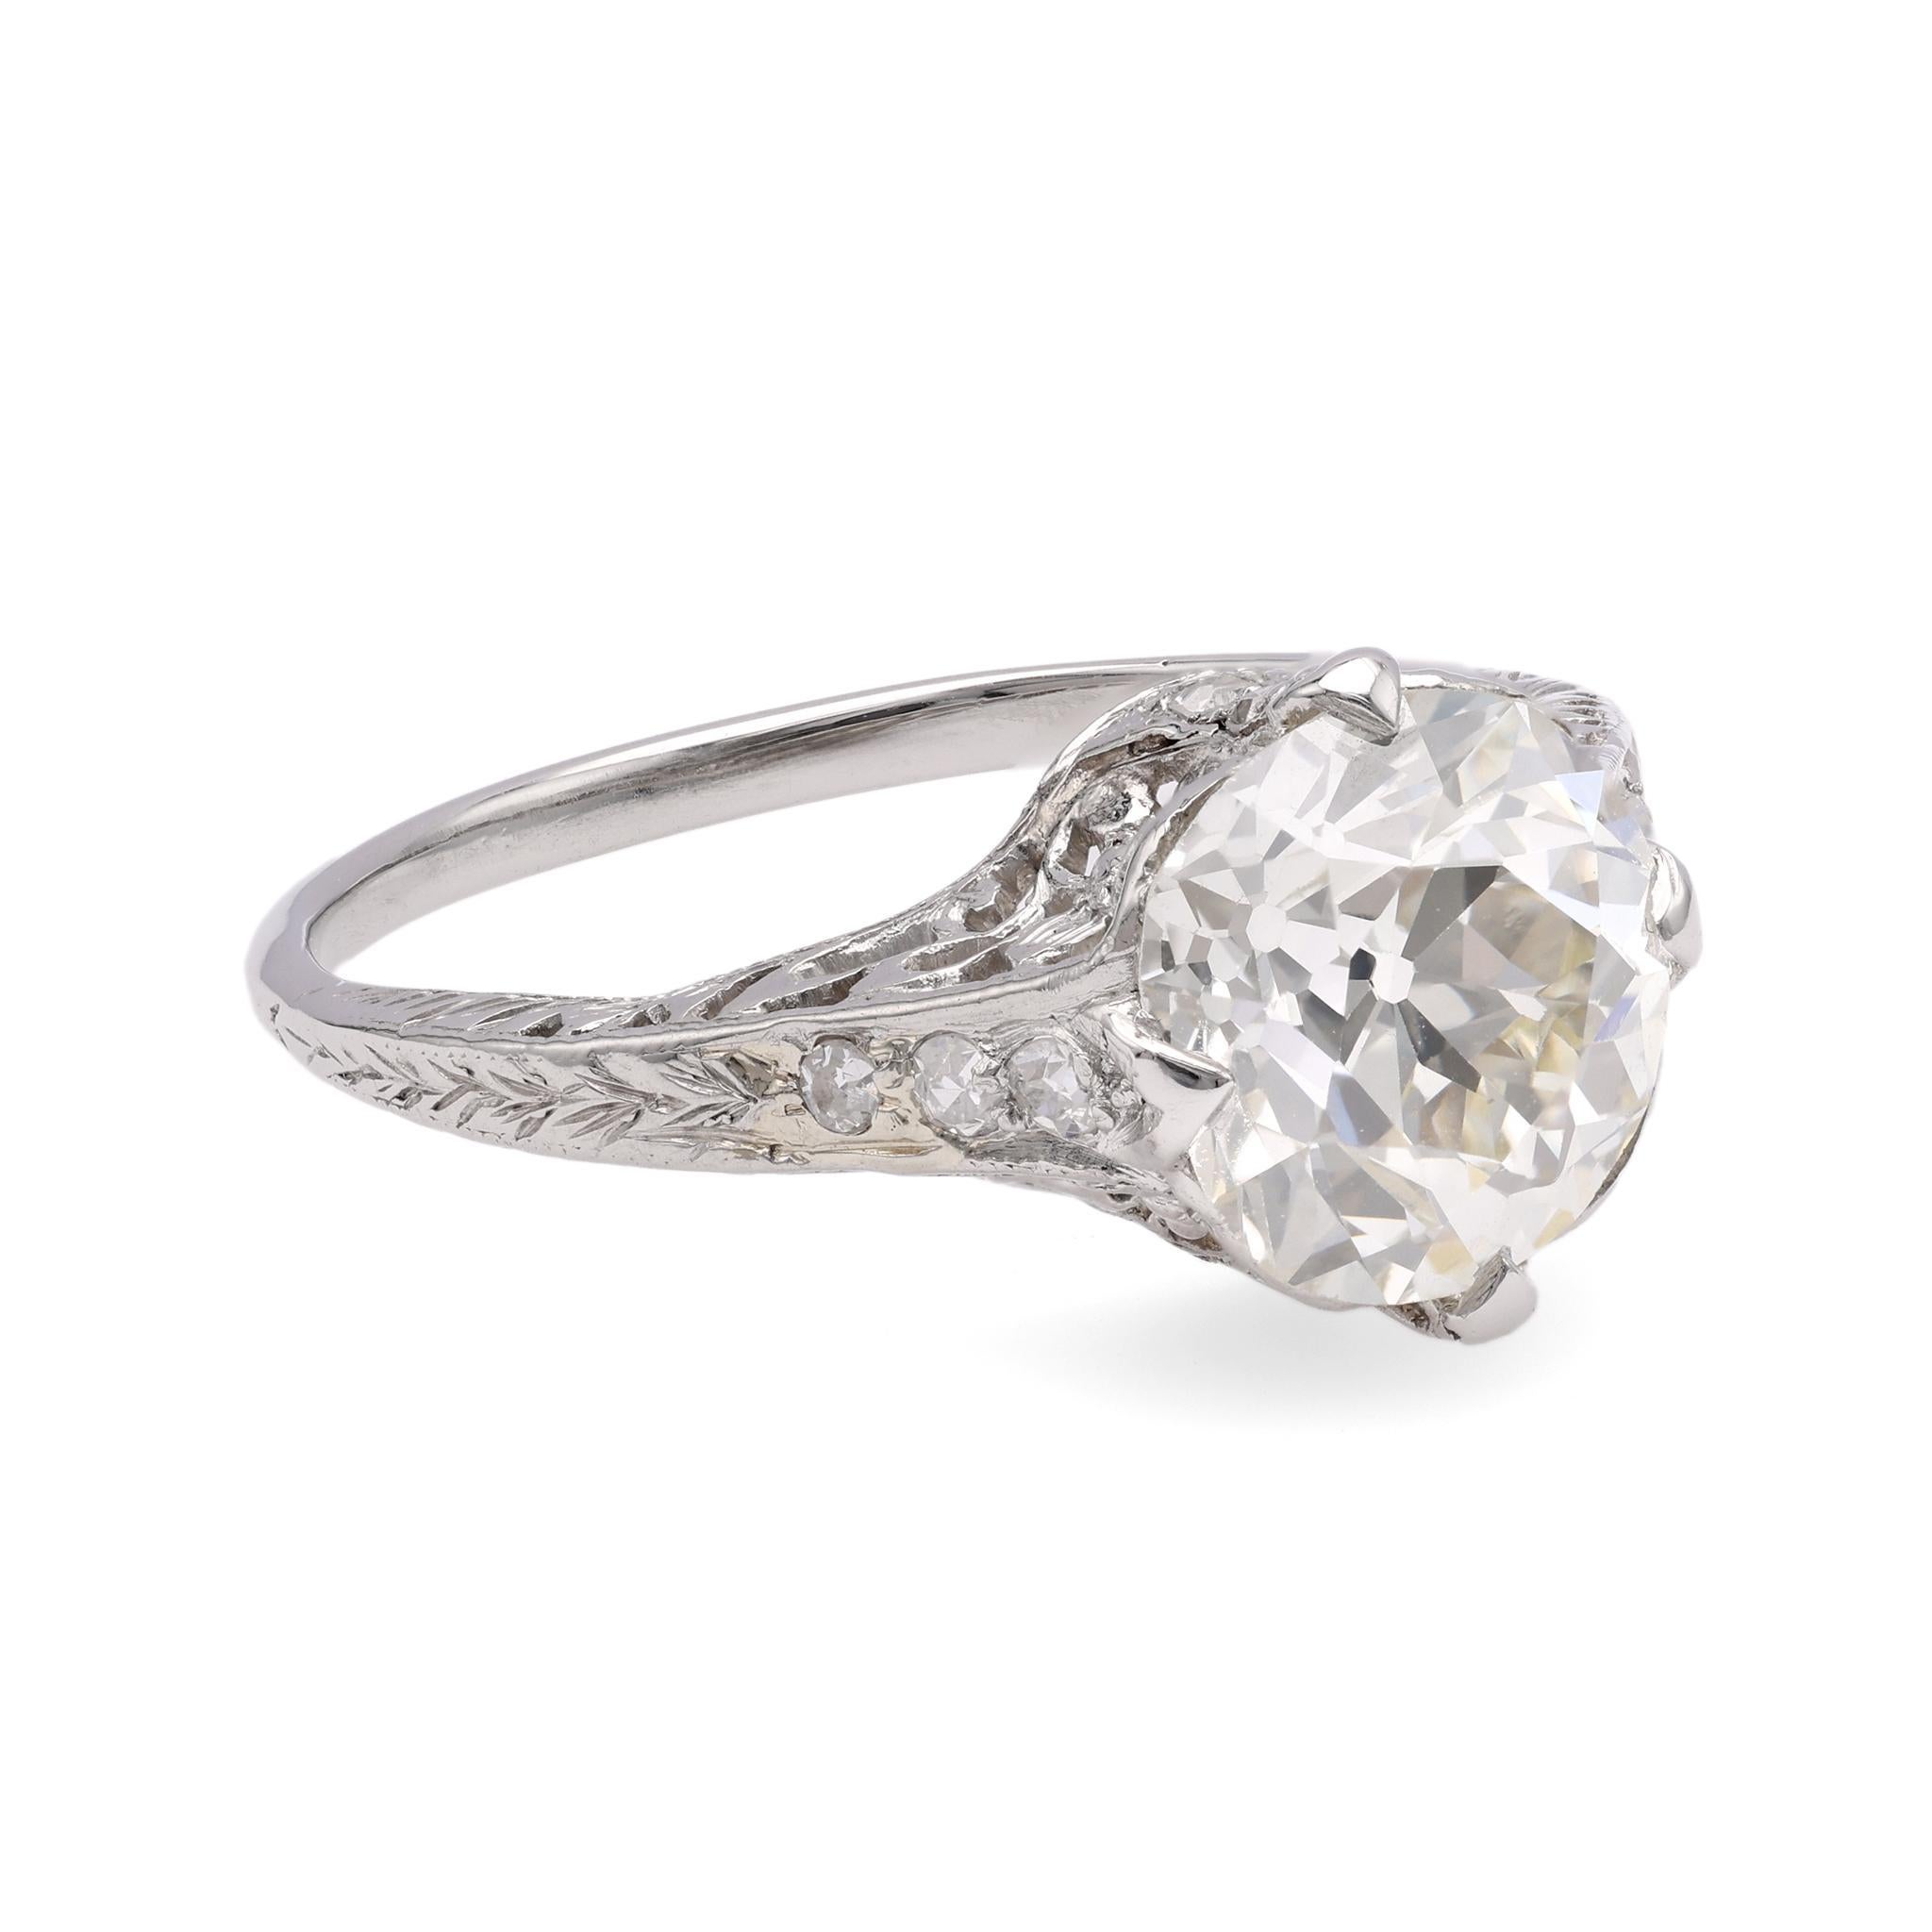 Art Deco GIA 2.08 Old Mine Cut Diamond Platinum Engagement Ring In Excellent Condition For Sale In Beverly Hills, CA